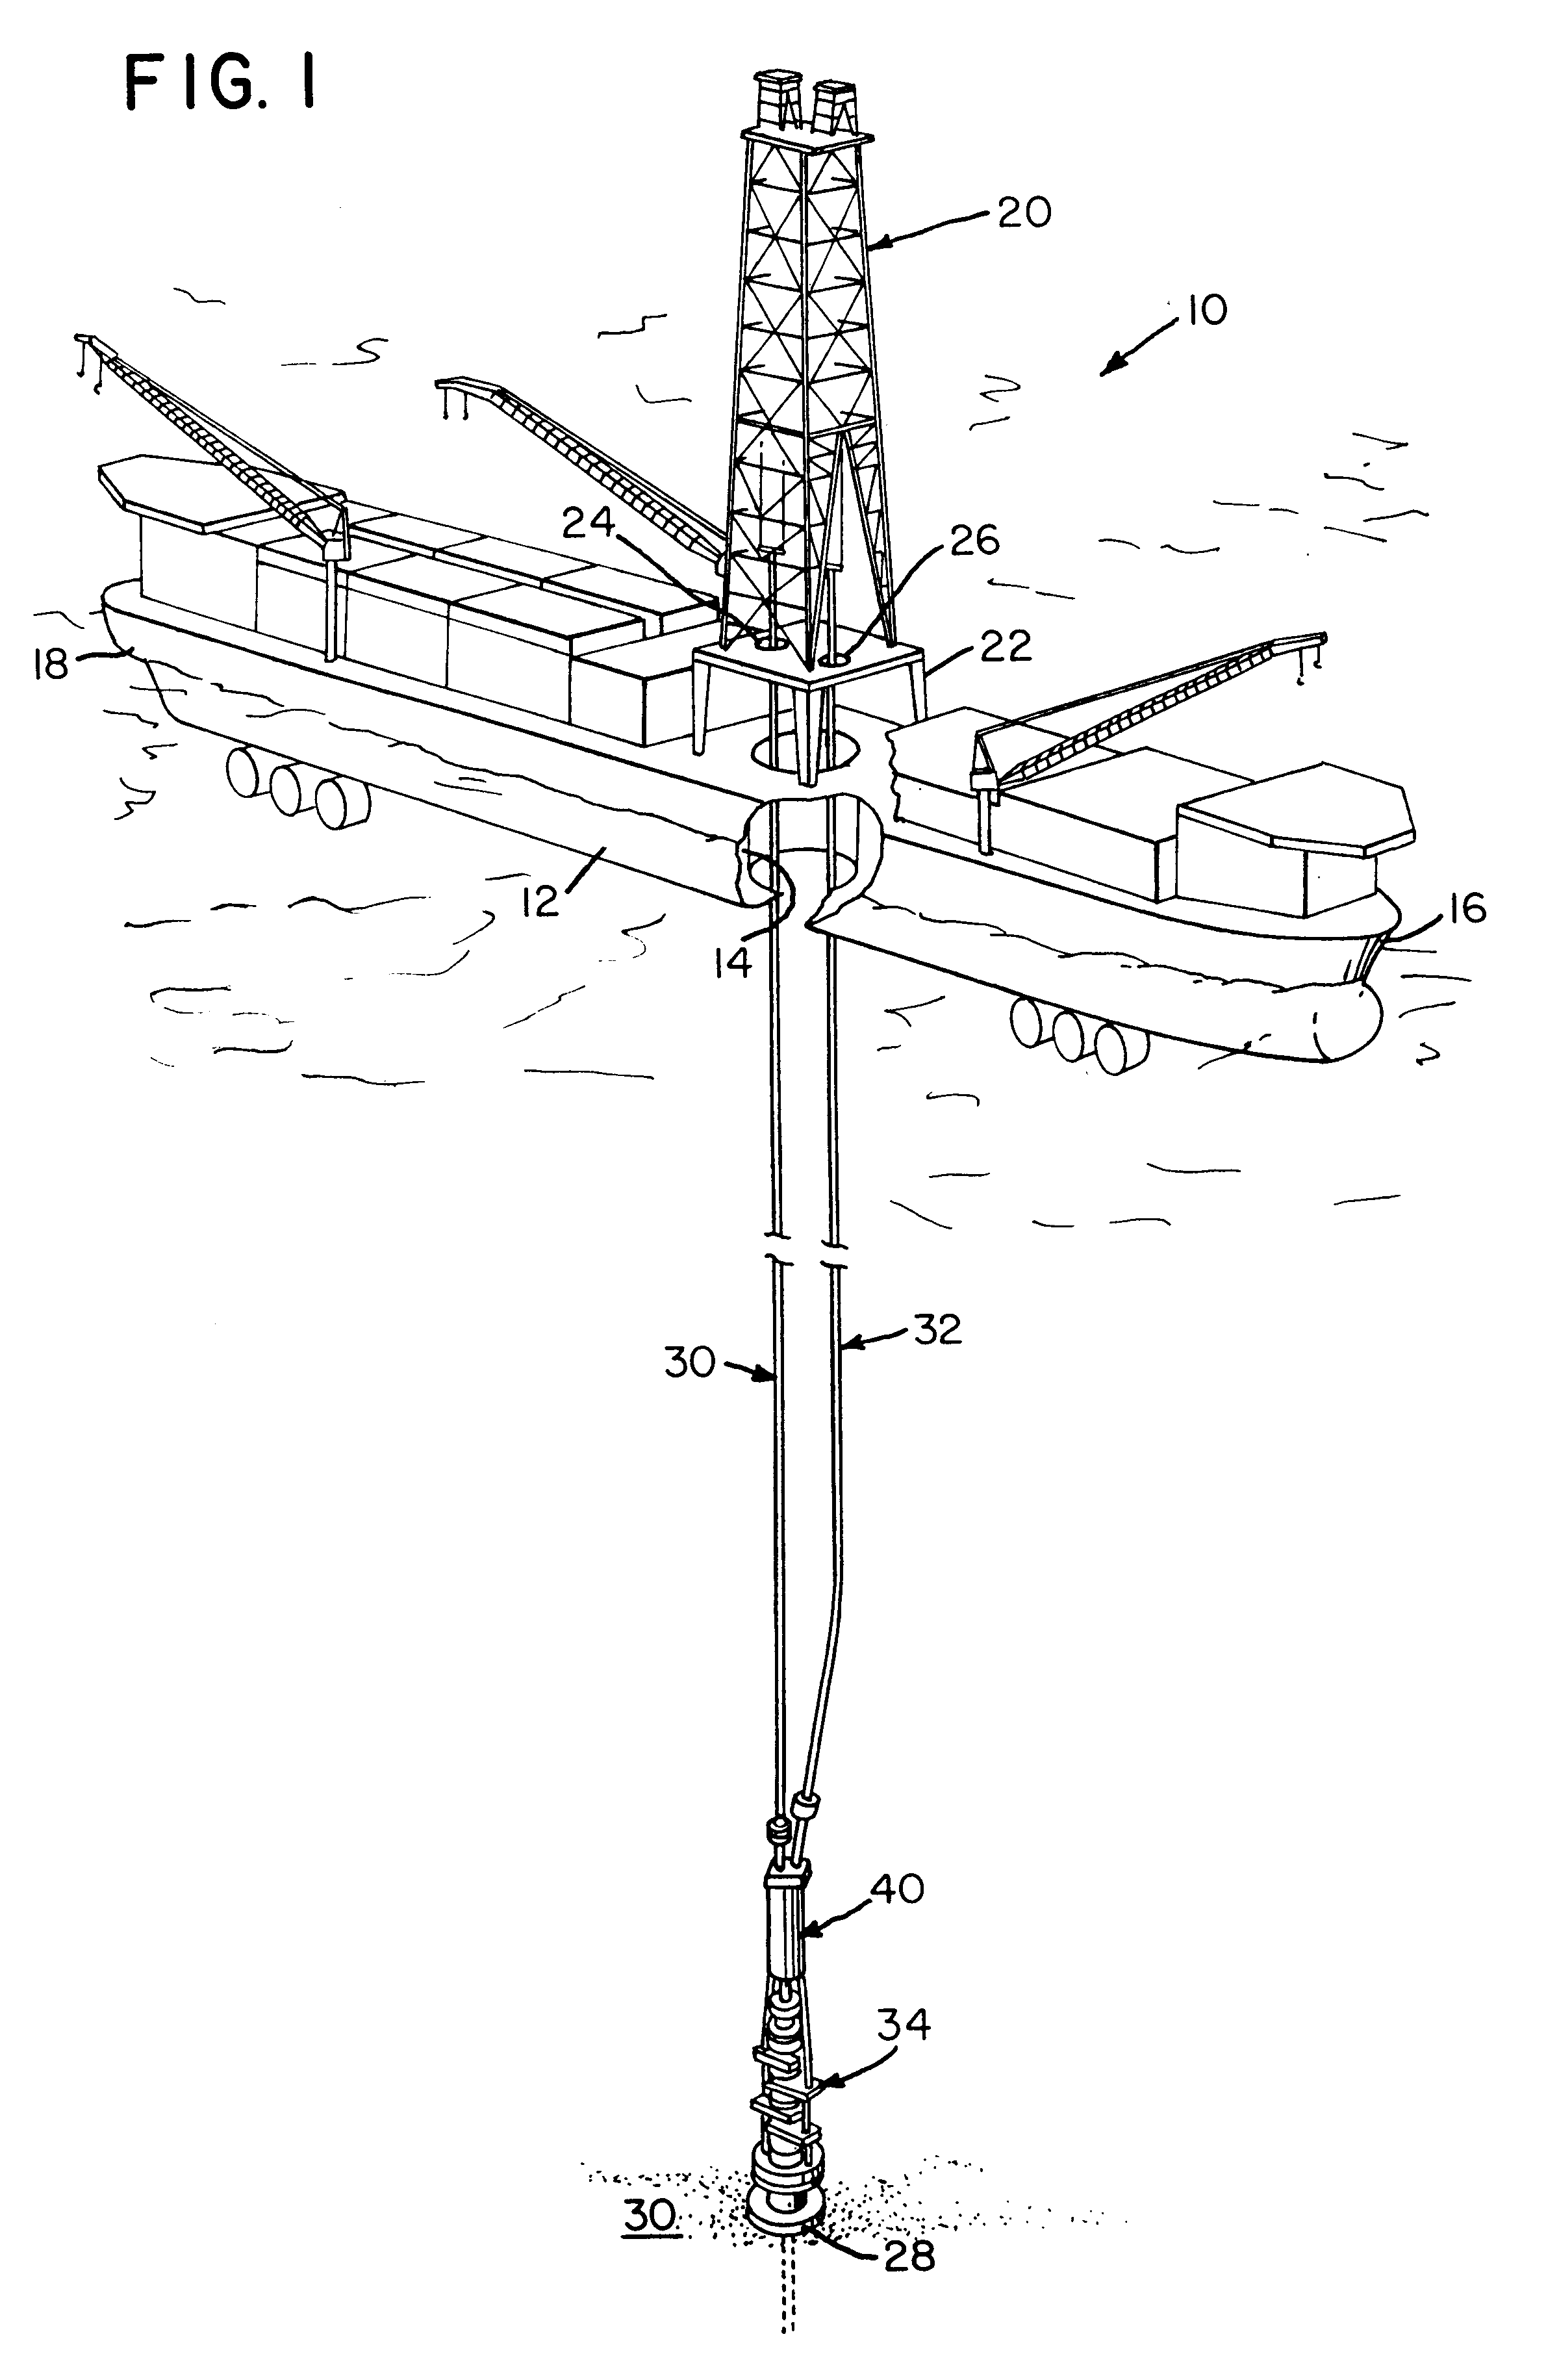 Dual riser assembly, deep water drilling method and apparatus